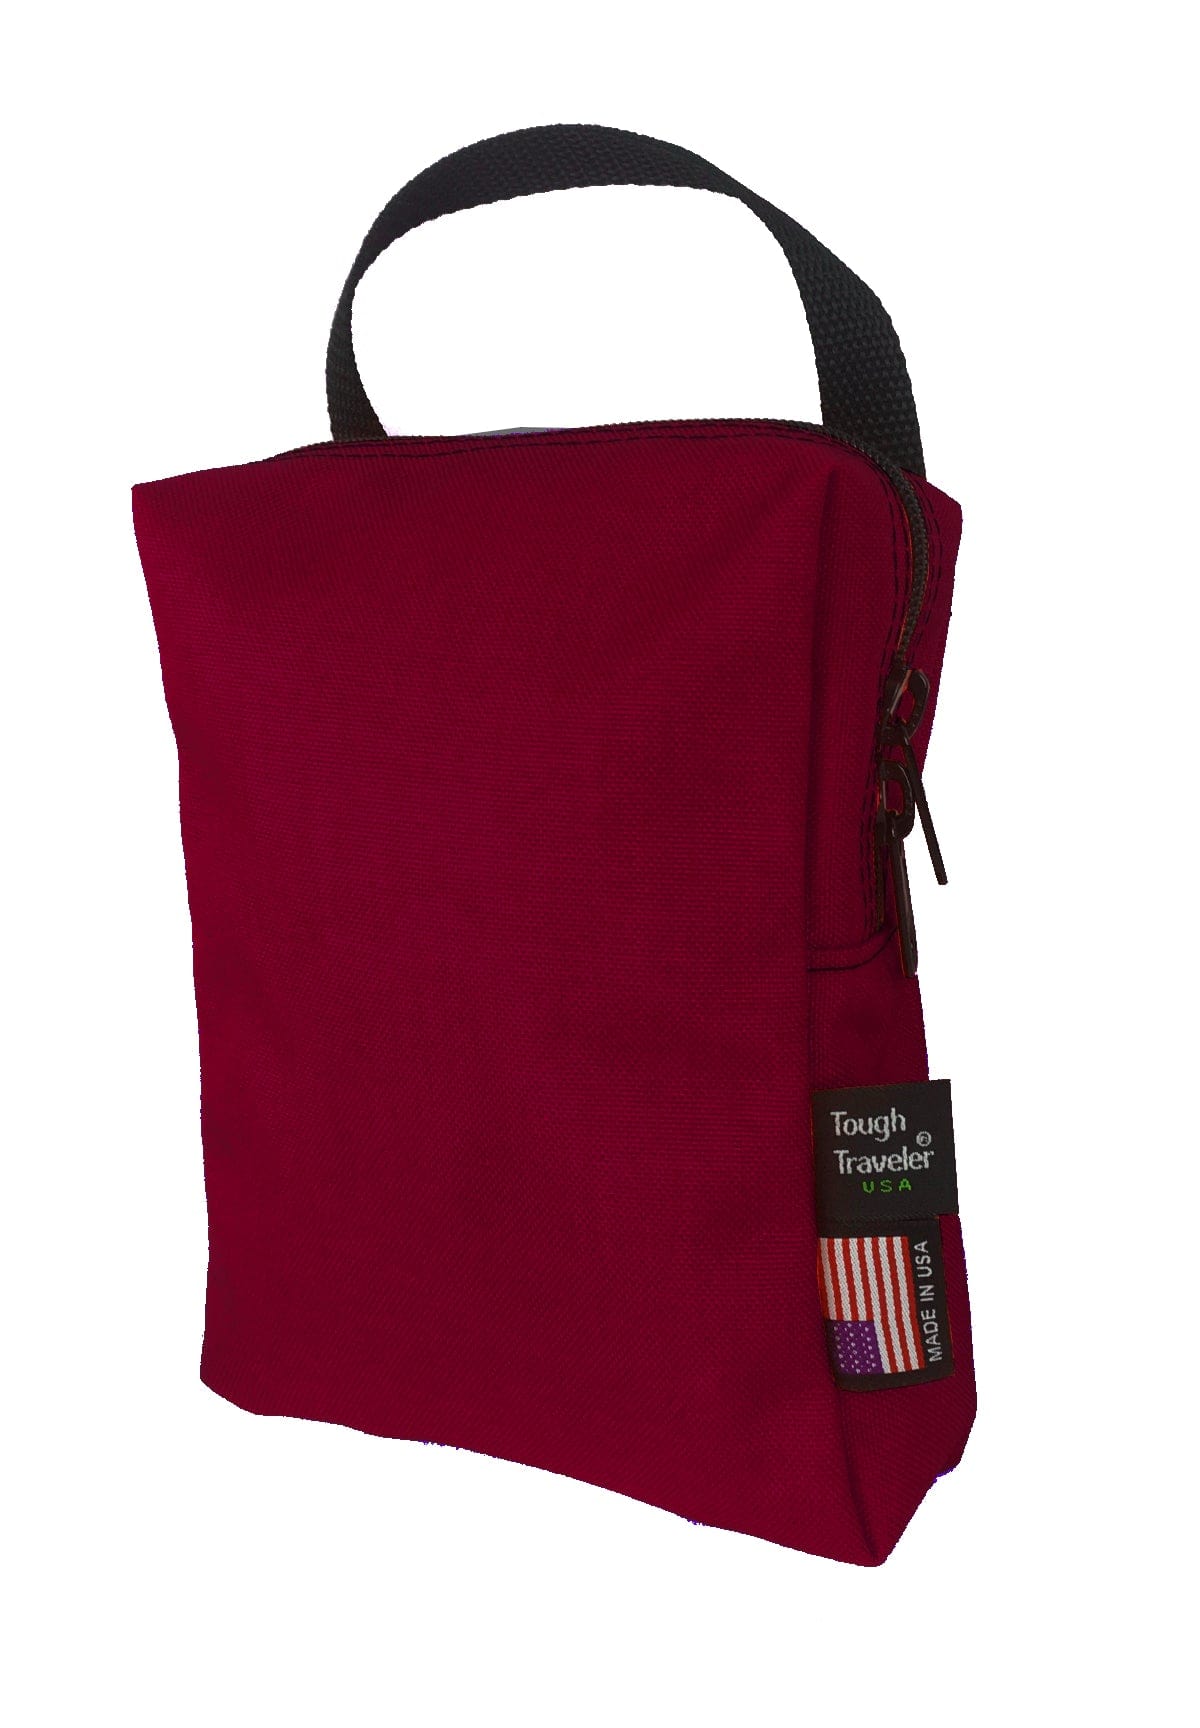 Made in USA RECTANGLE HANDLE POUCH 